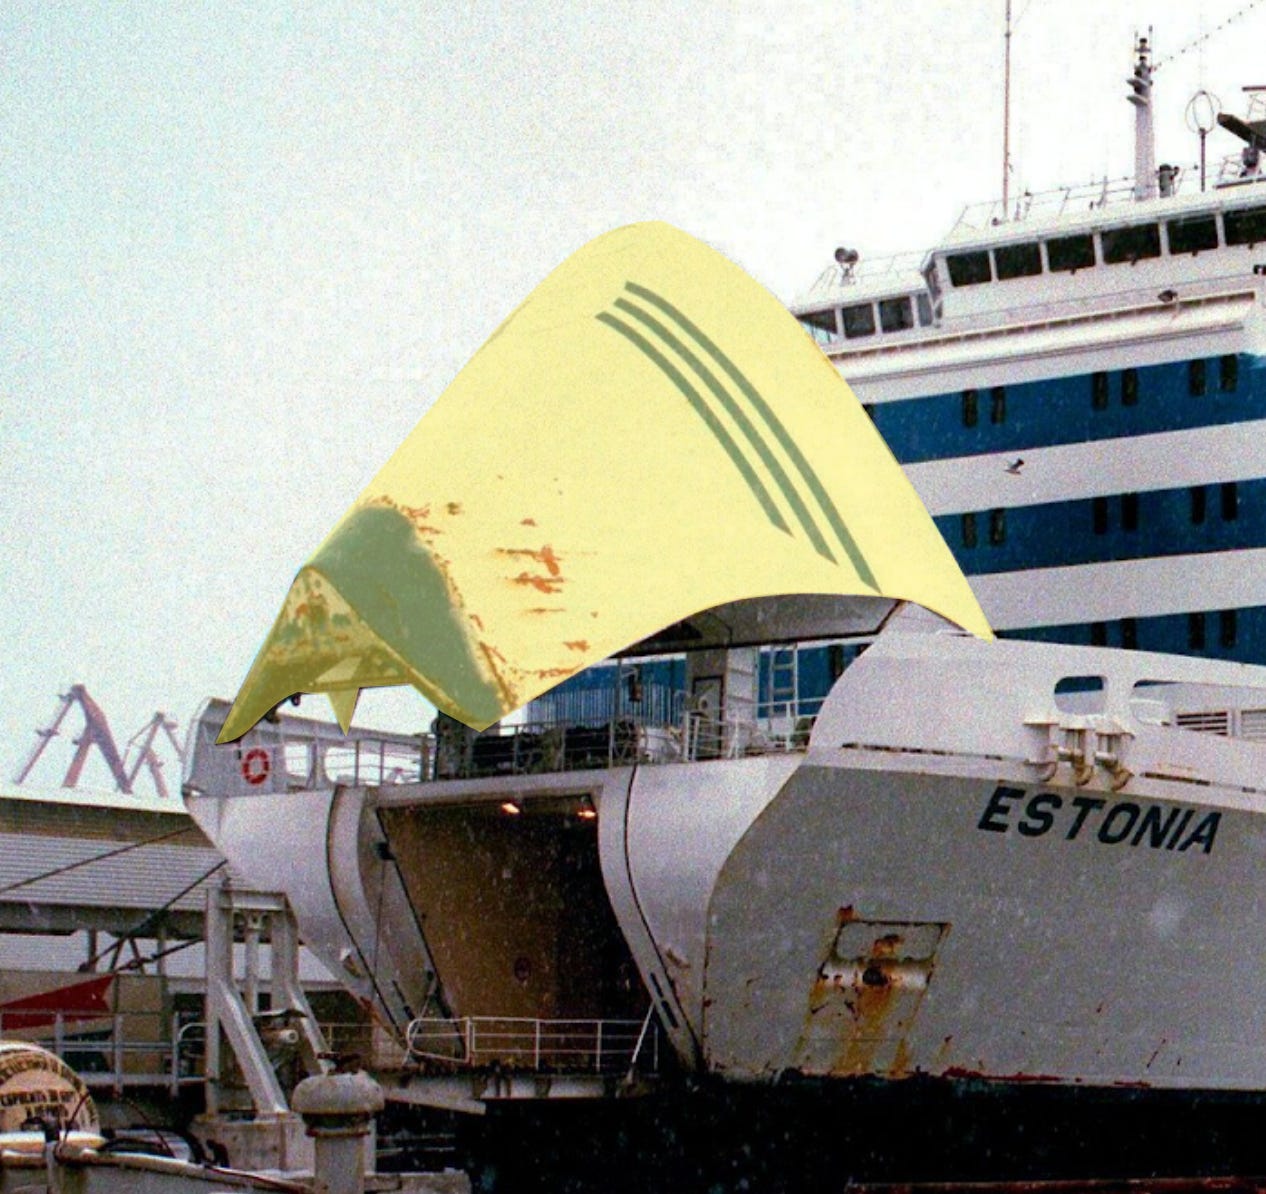 The bow visor (highlighted) was a forward, moving part of the ship superstructure high above the waterline to keep the ferry looking nice. The ferry could have sailed around with a closed weathertight ramp and no bow visor without issue. 